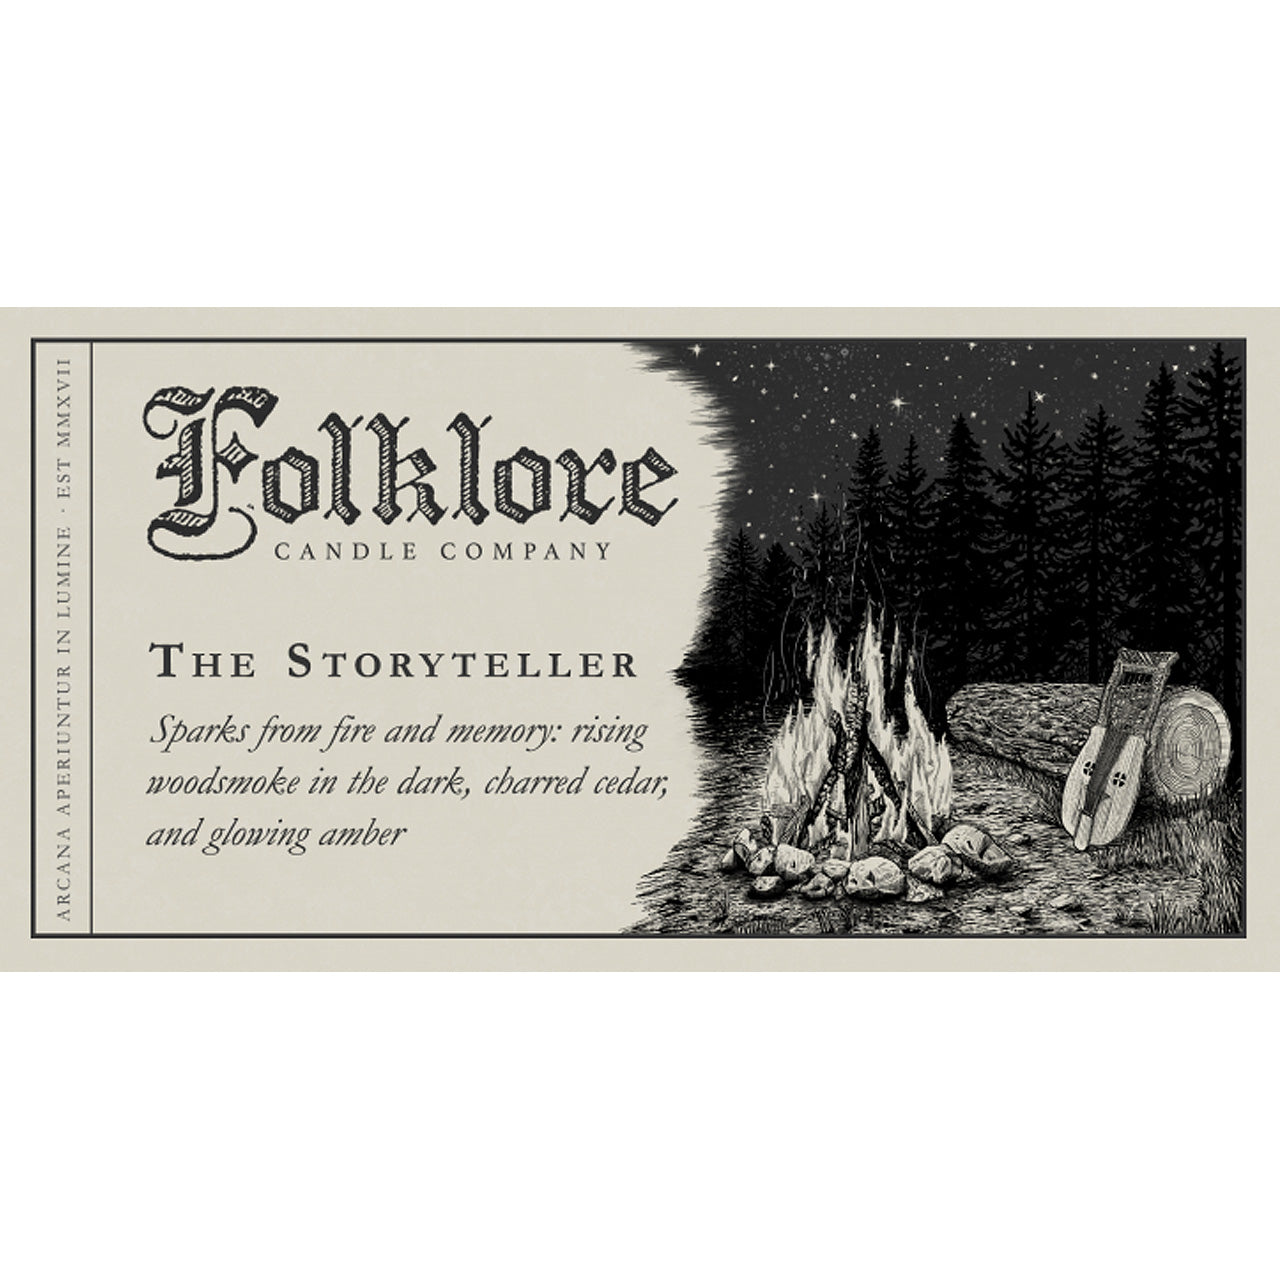 The Storyteller - Folklore Candle Company